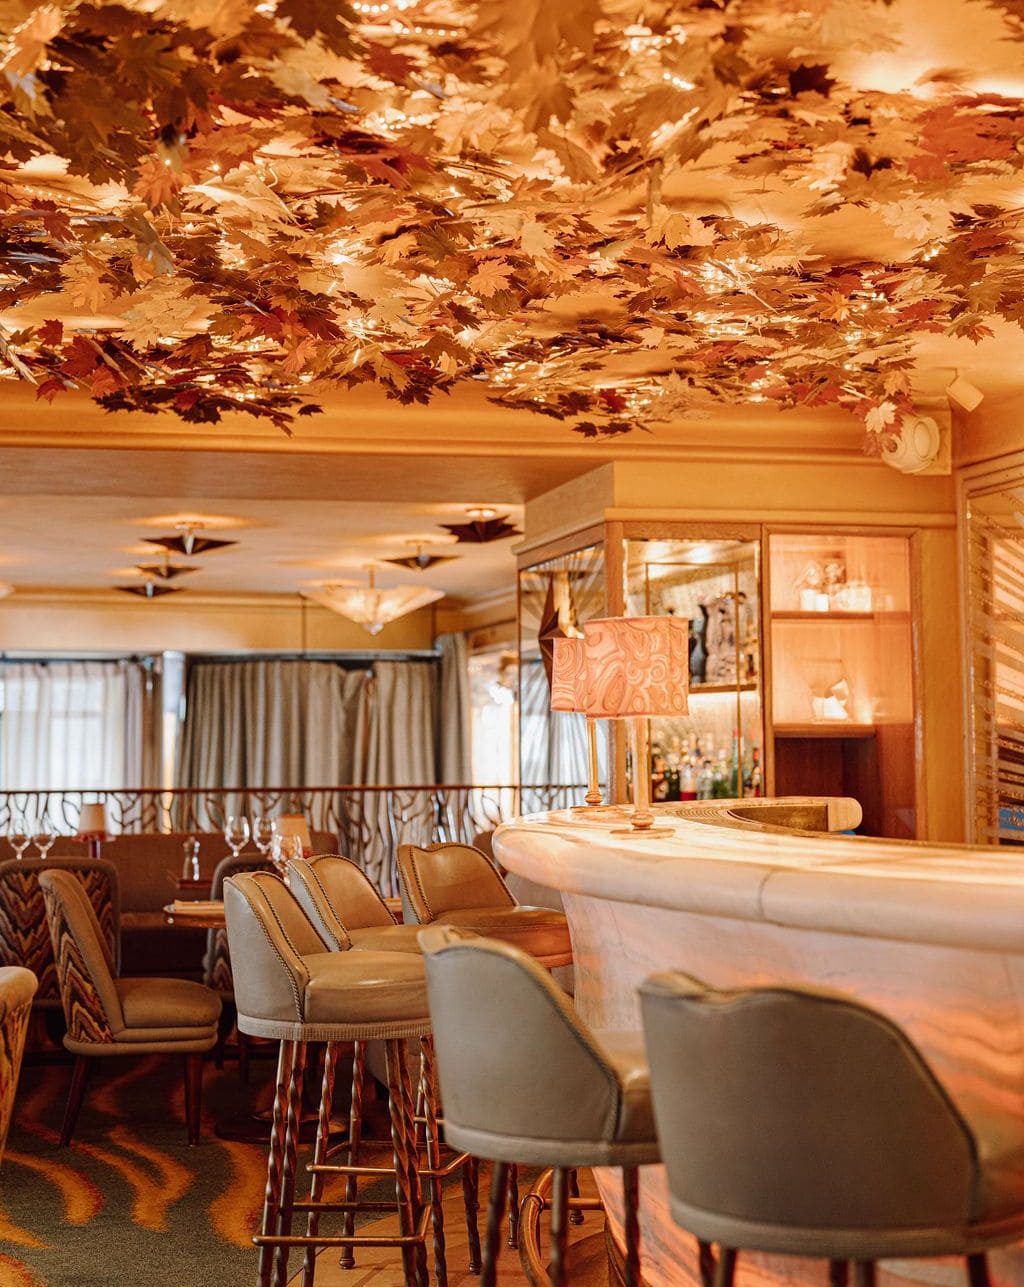 Elegant bar at Les Jardins du Presbourg in Paris with a golden leaves decorated ceiling and warm ambiance.